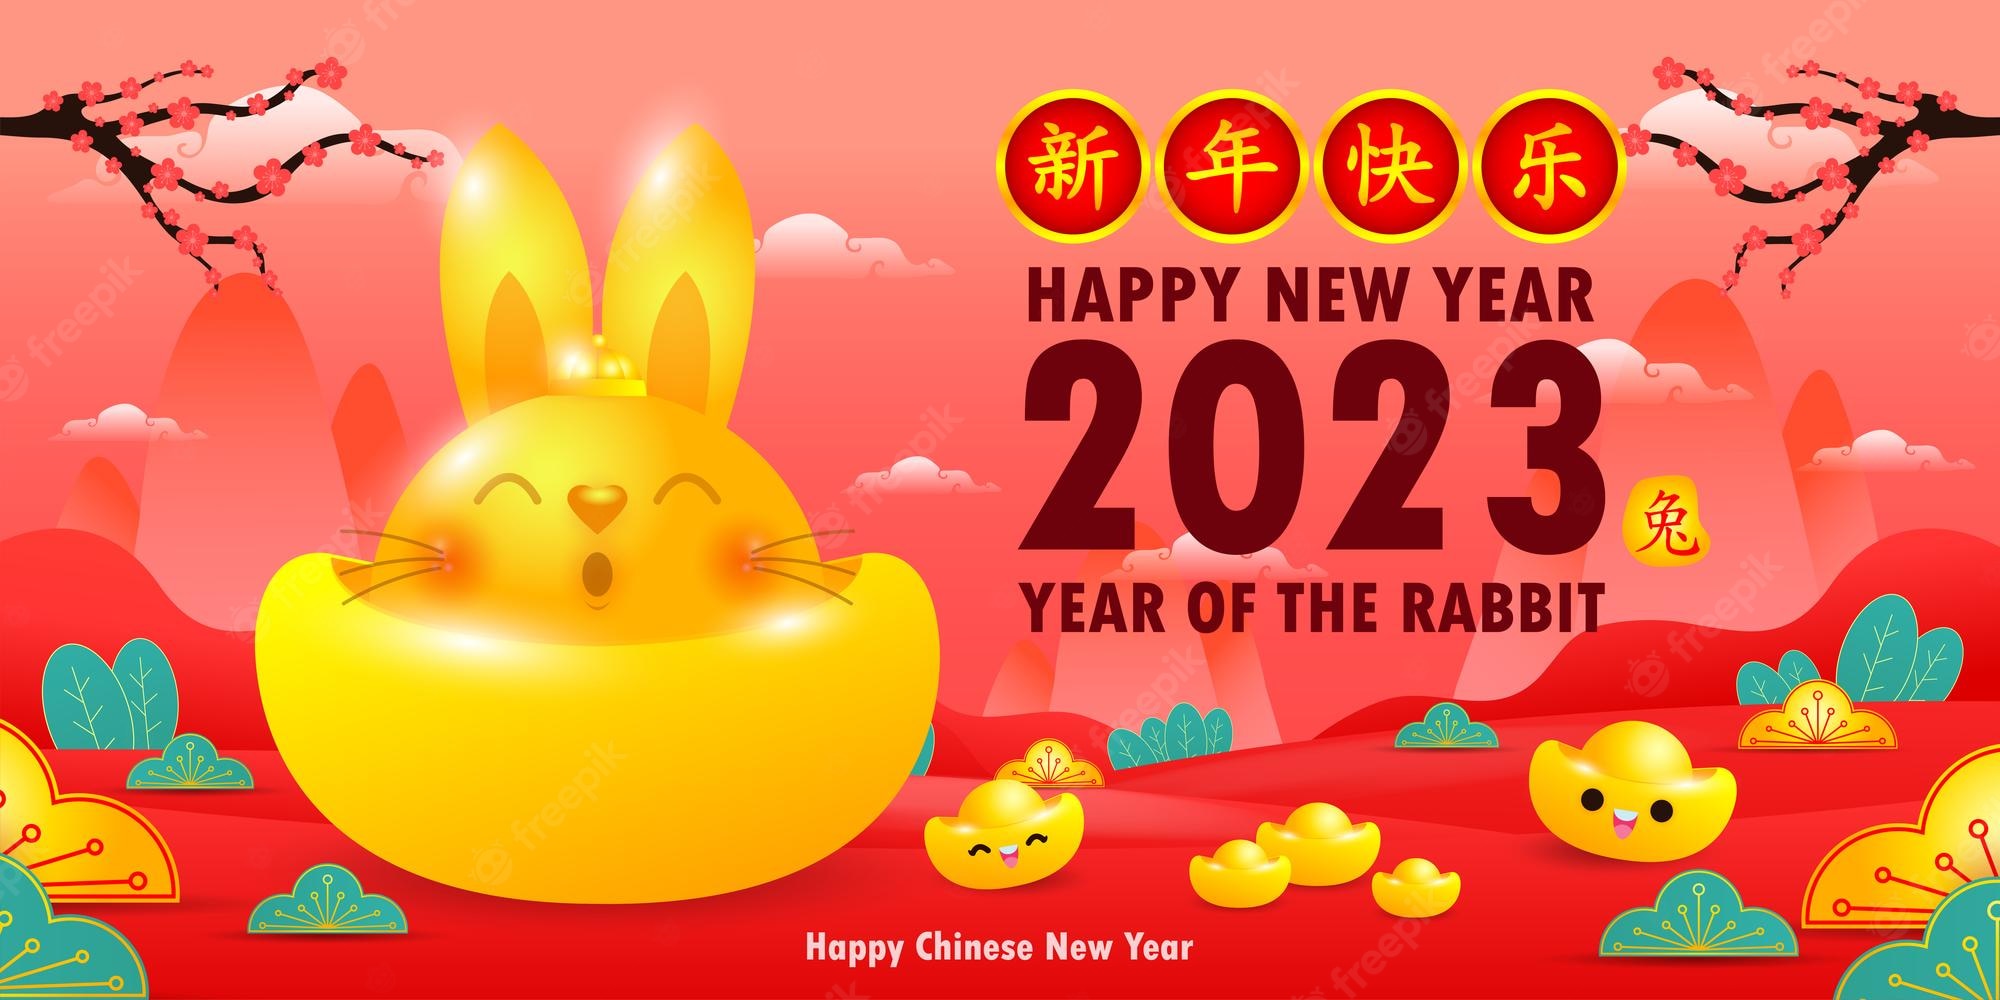 Chinese New Year 2023 Image. Free Vectors, & PSD